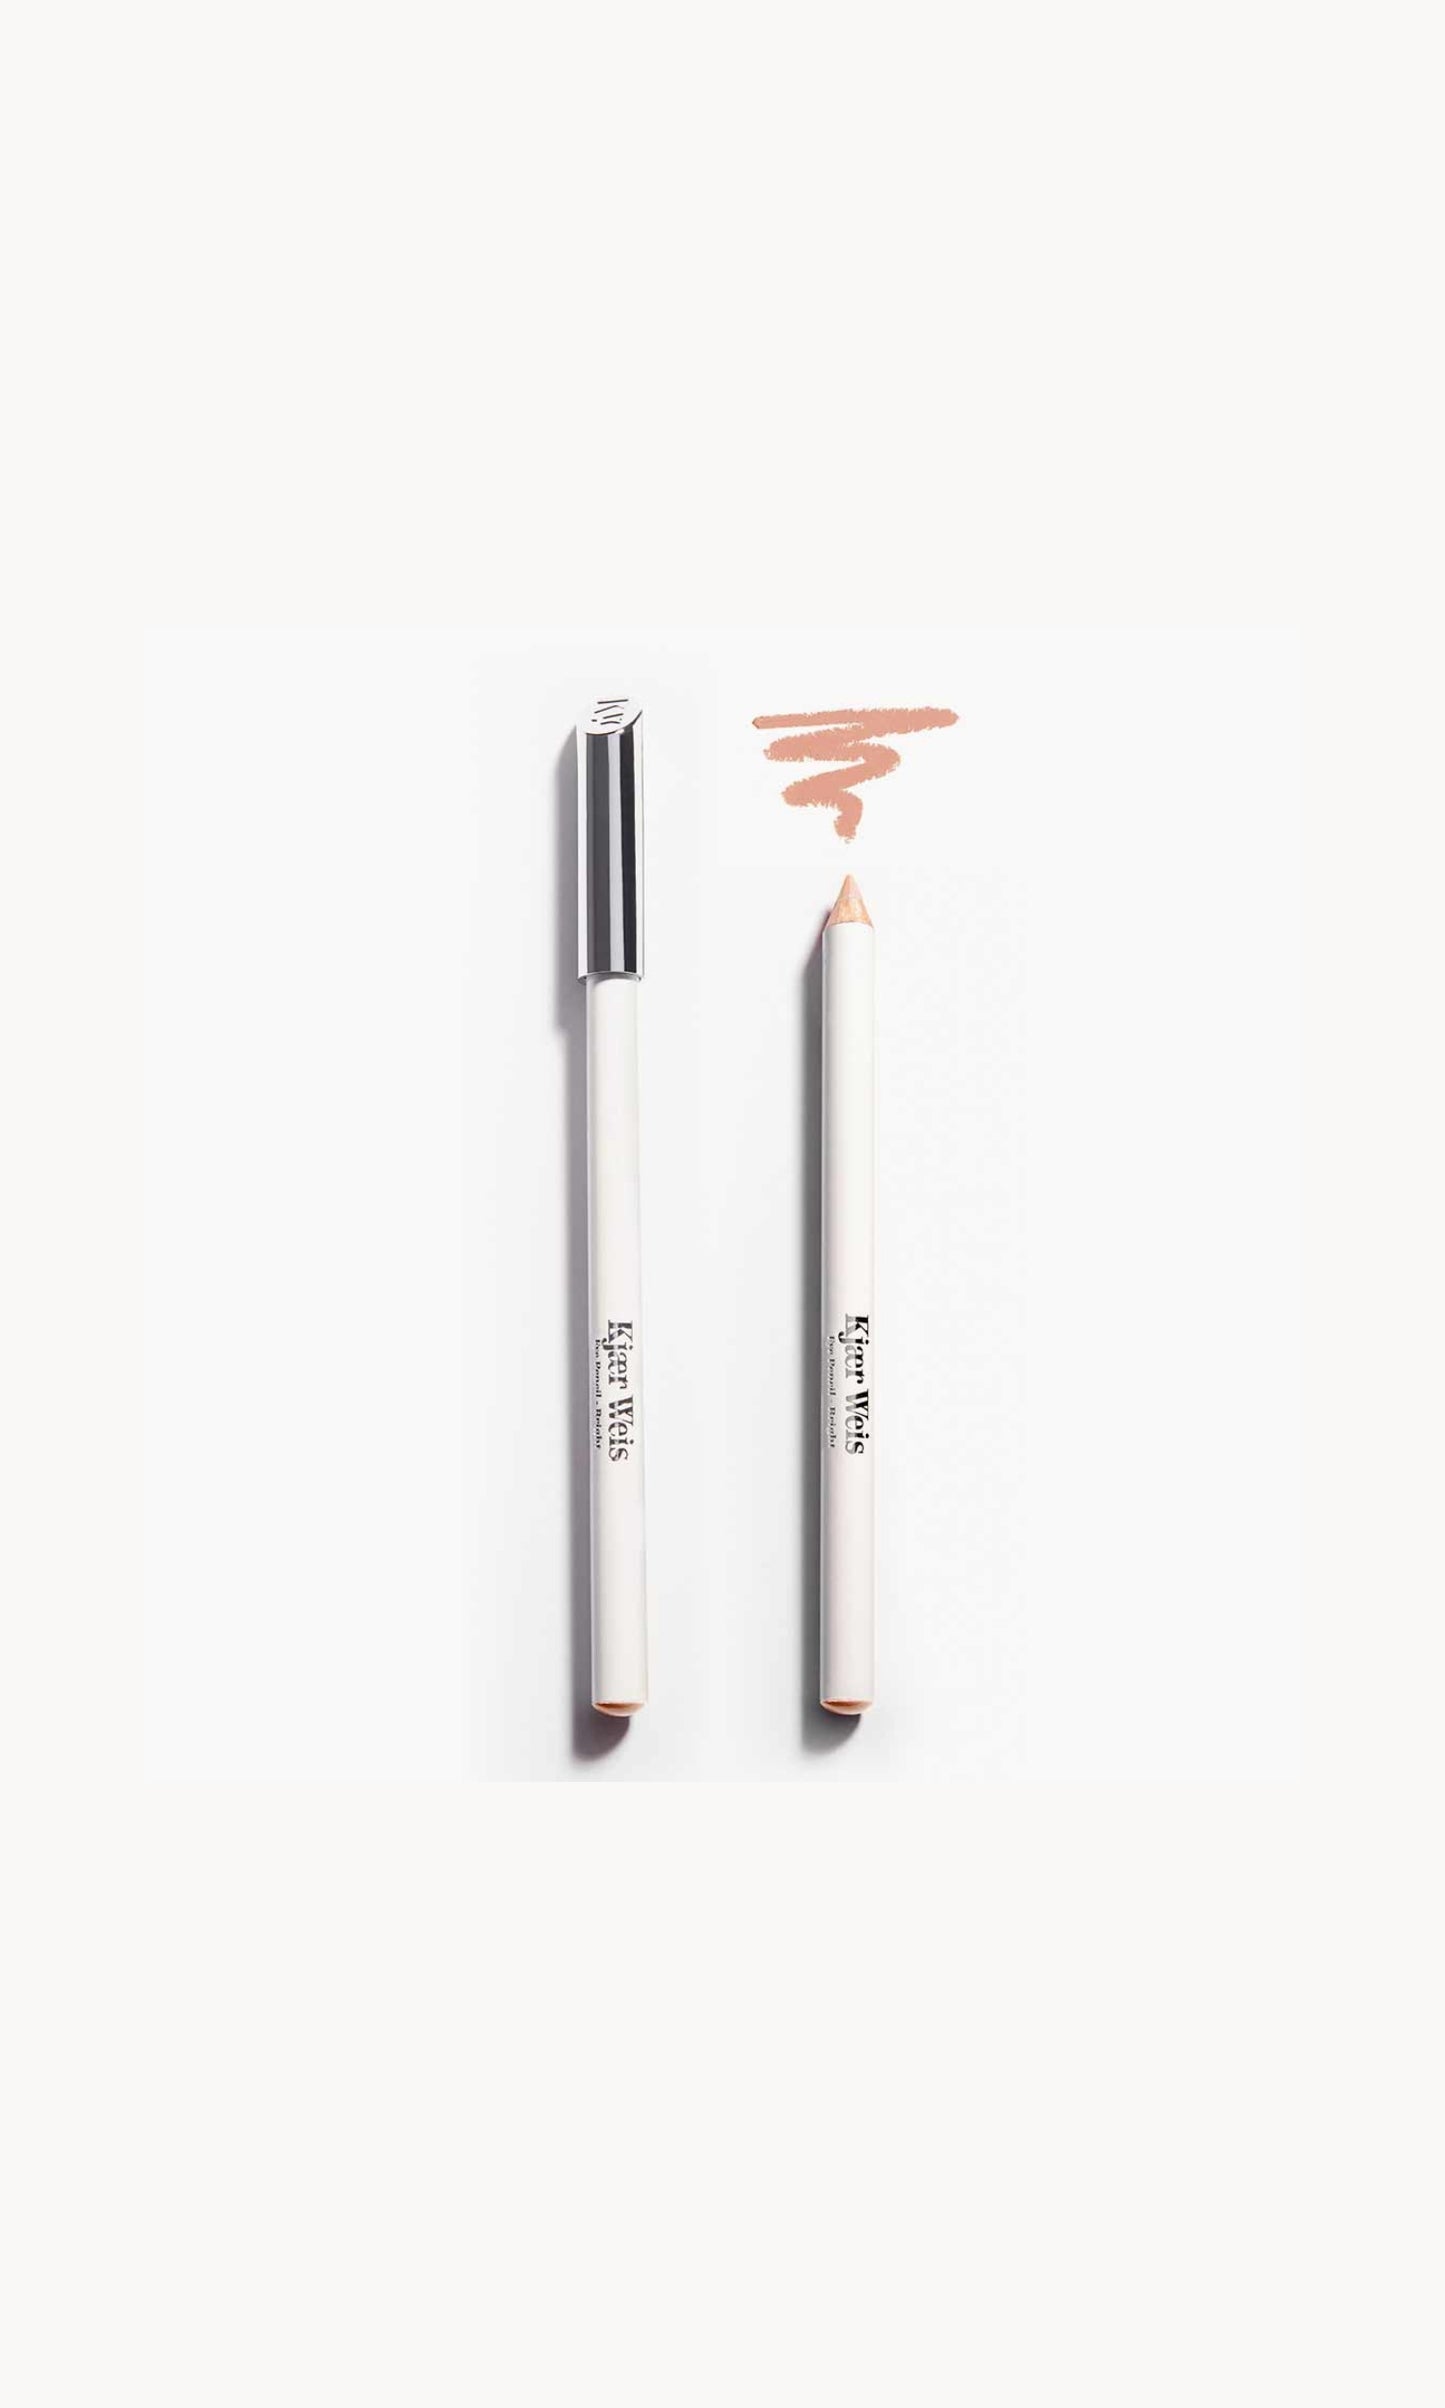 Two white pencils on a white background. Once pencil has a silver lid and the other shows the soft beige pencil with a soft beige line above it